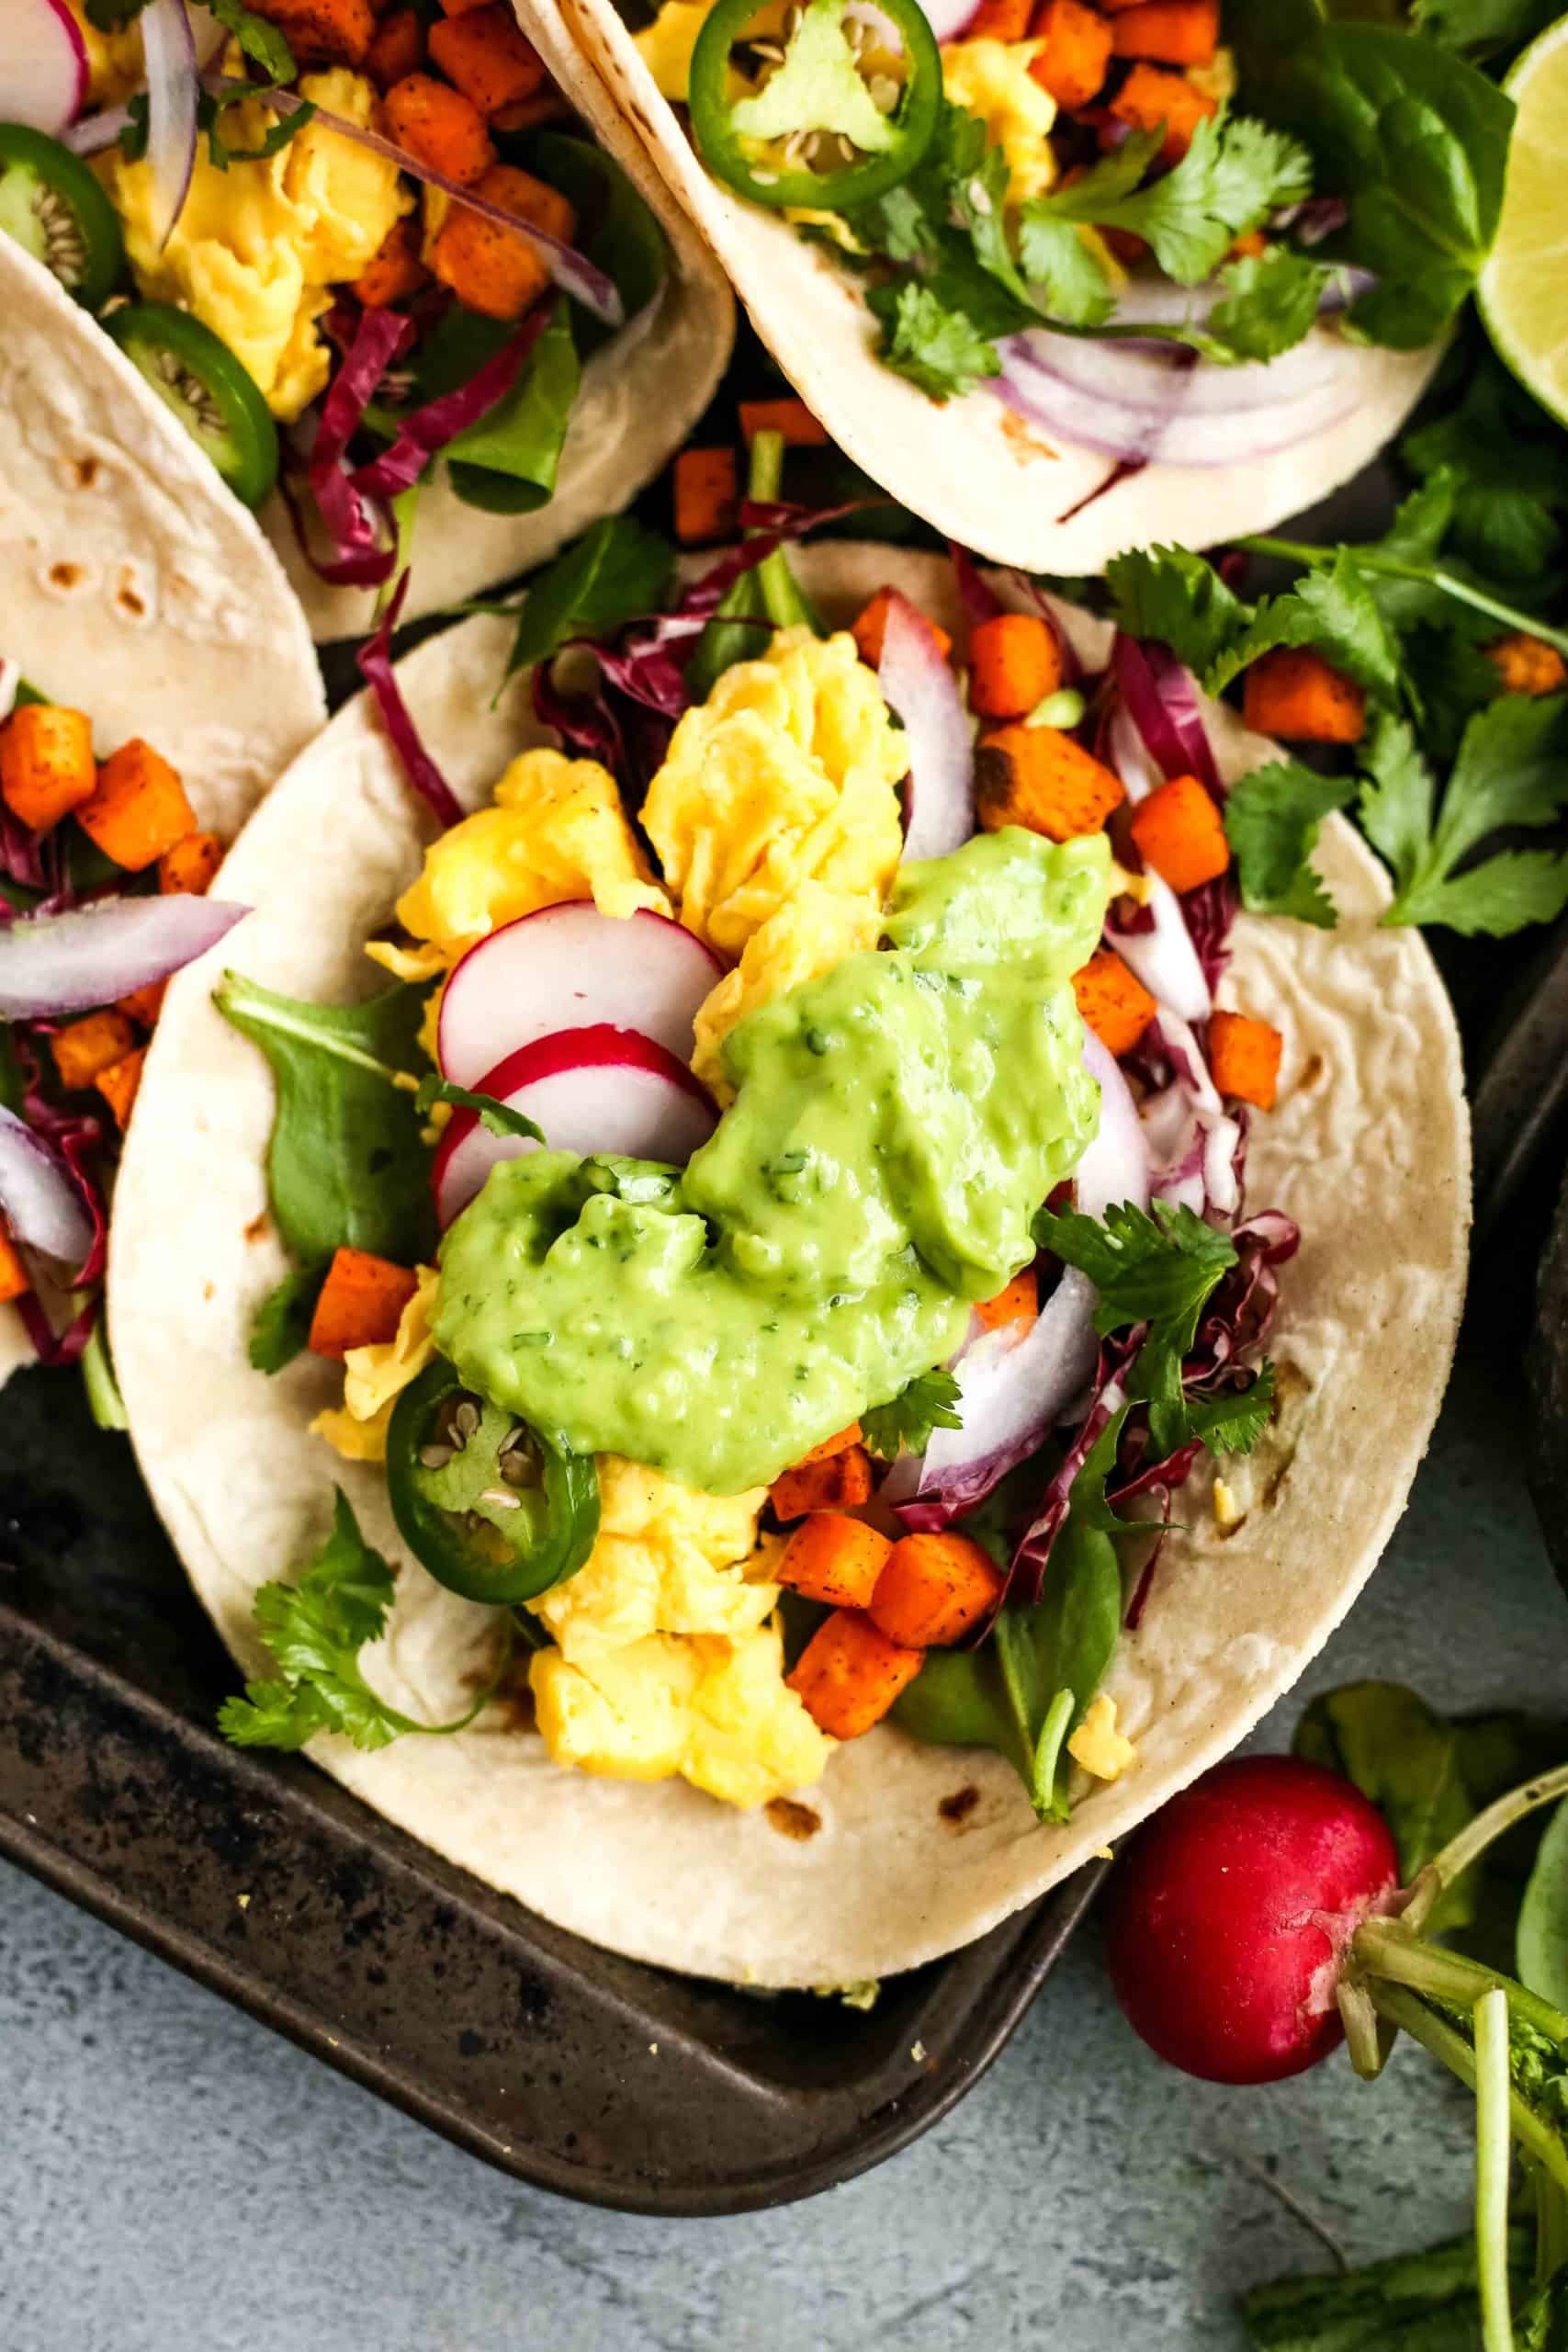 A close overhead view of a scrambled egg breakfast taco, topped with a general drizzle of a creamy avocado sauce, with colorful veggies filling the taco and extra cilantro scattered around it